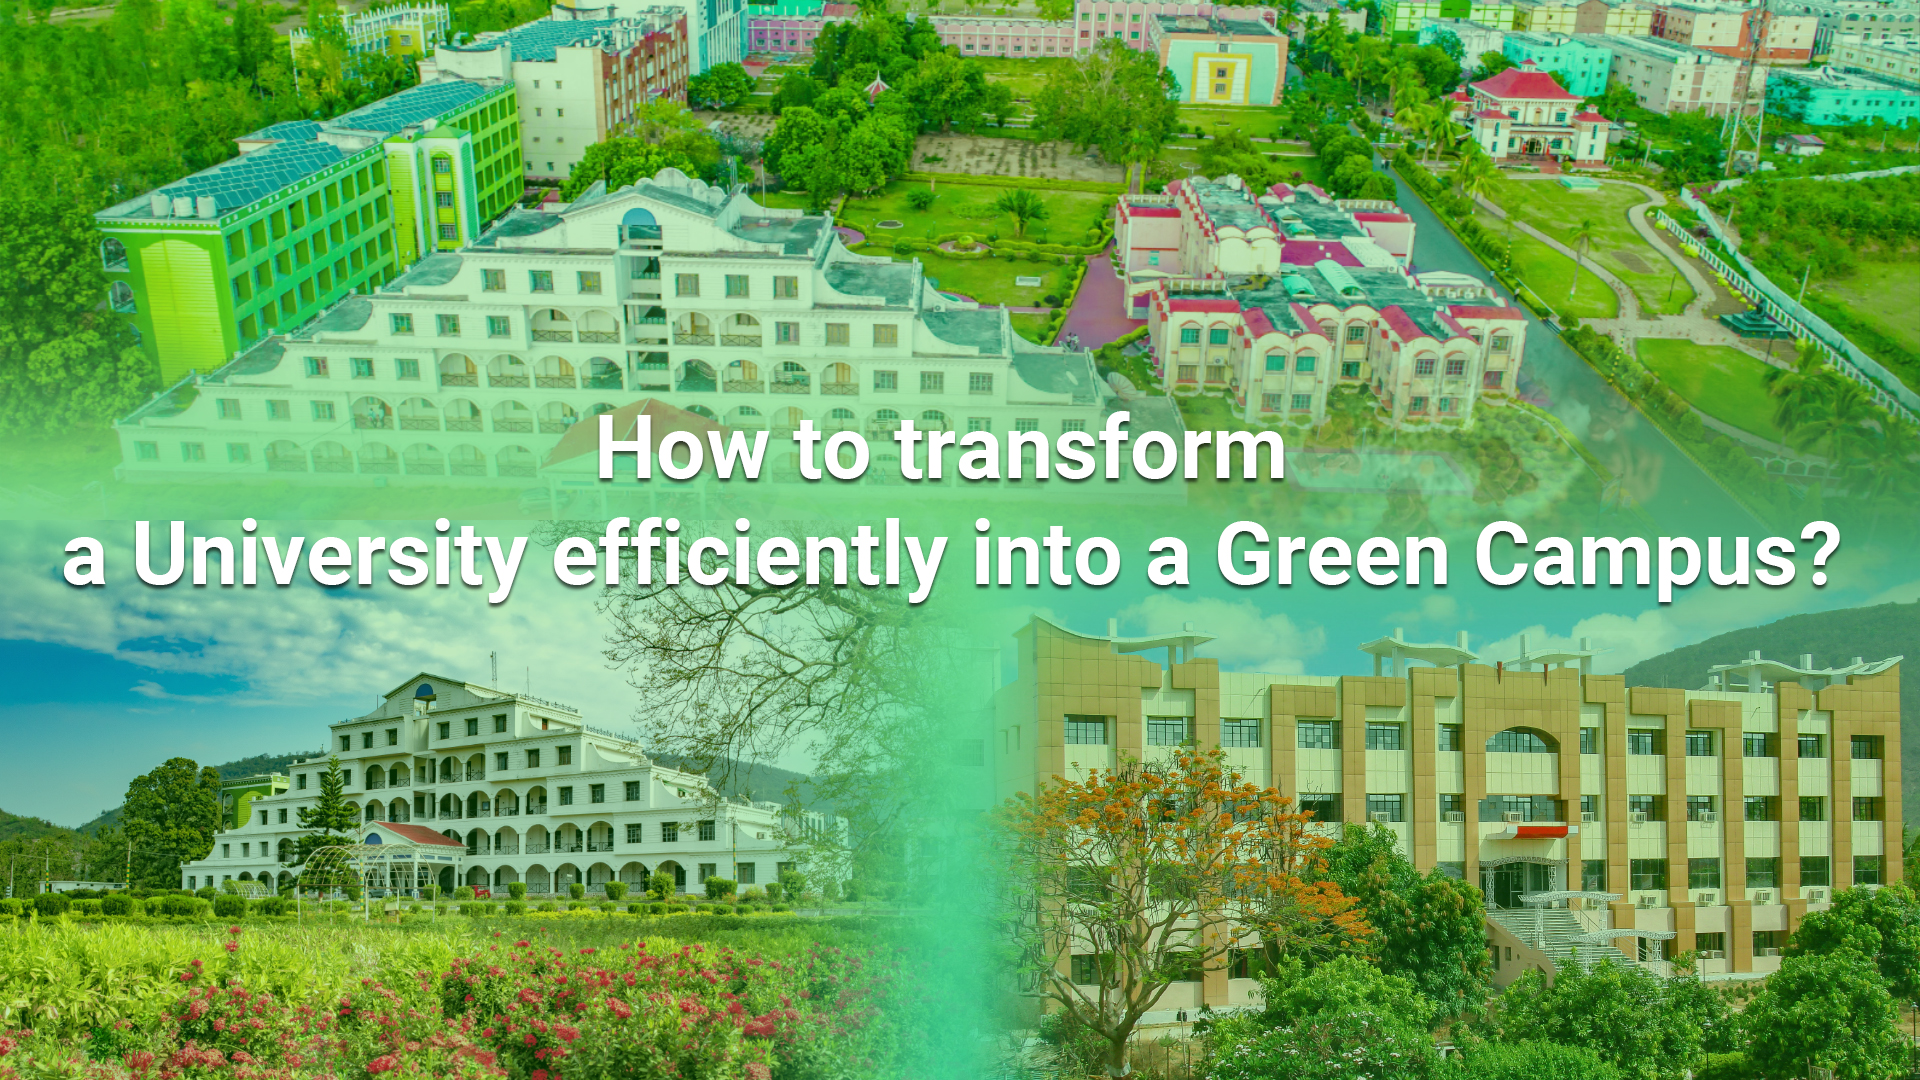 How to transform a University efficiently into a Green Campus?